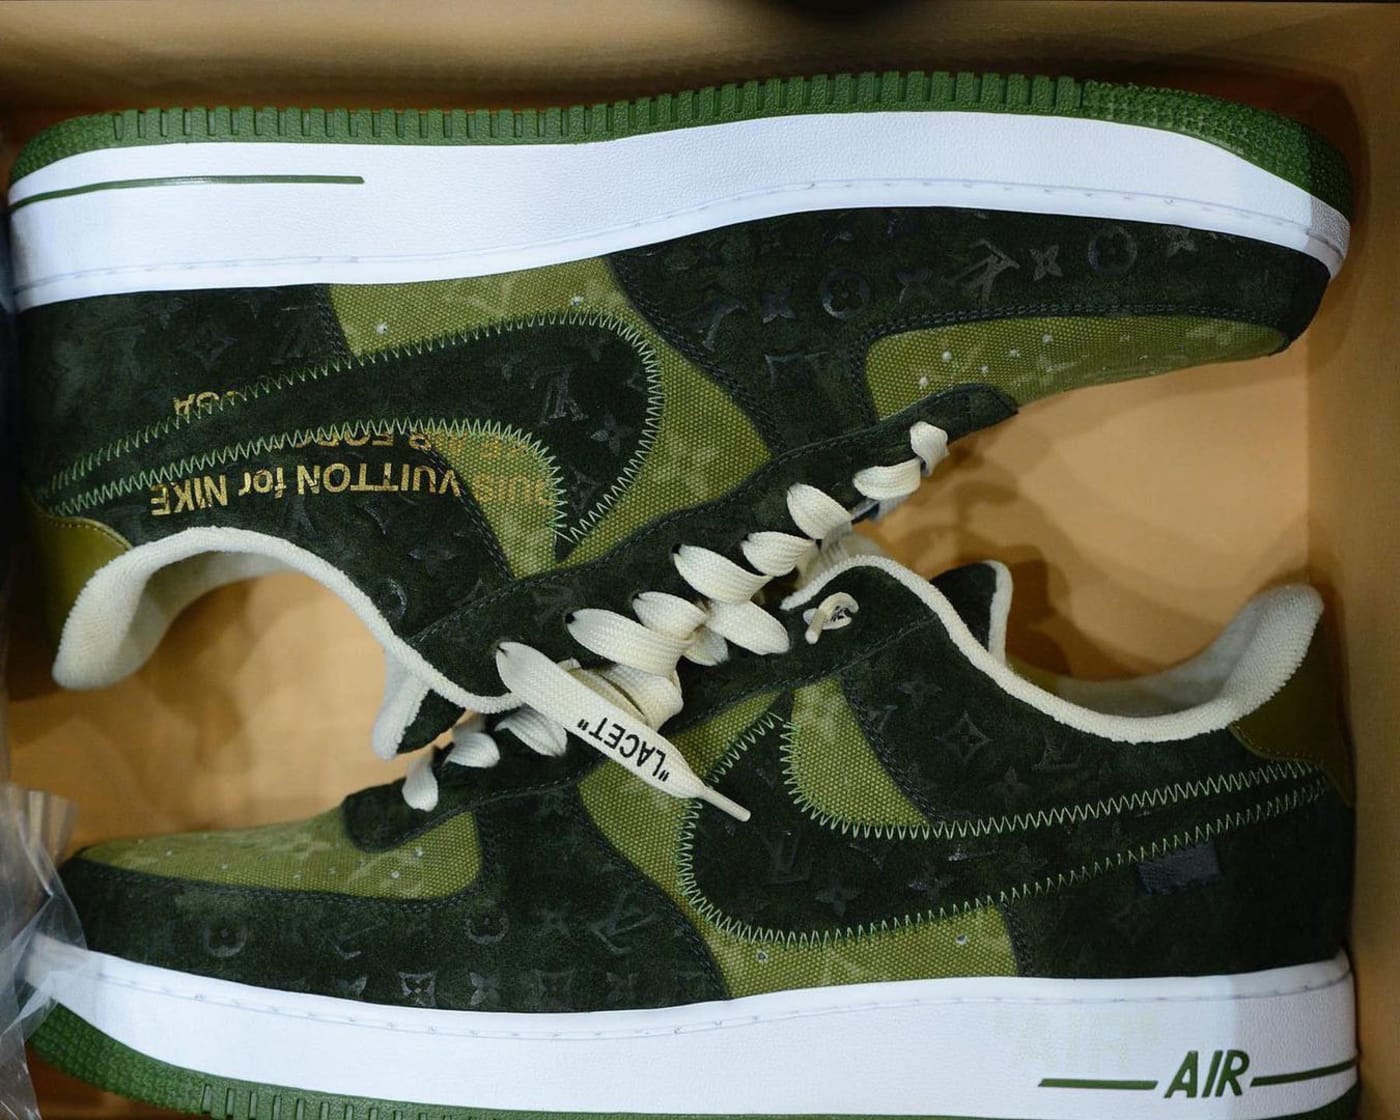 Sotheby's Charity Auction of Louis Vuitton x Nike 'Air Force 1